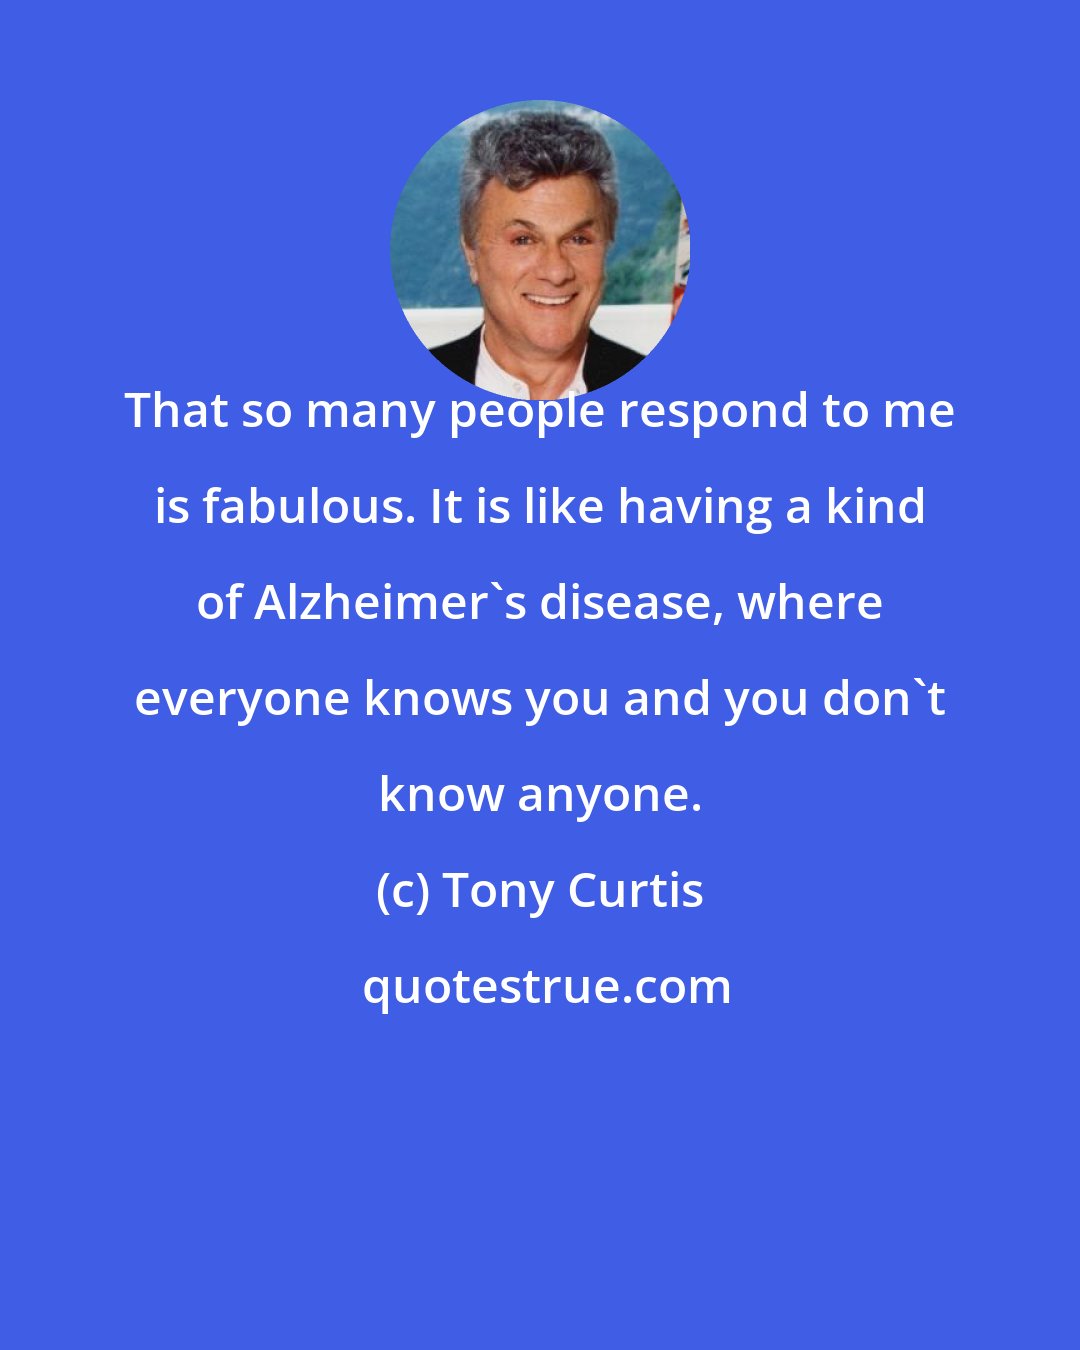 Tony Curtis: That so many people respond to me is fabulous. It is like having a kind of Alzheimer's disease, where everyone knows you and you don't know anyone.